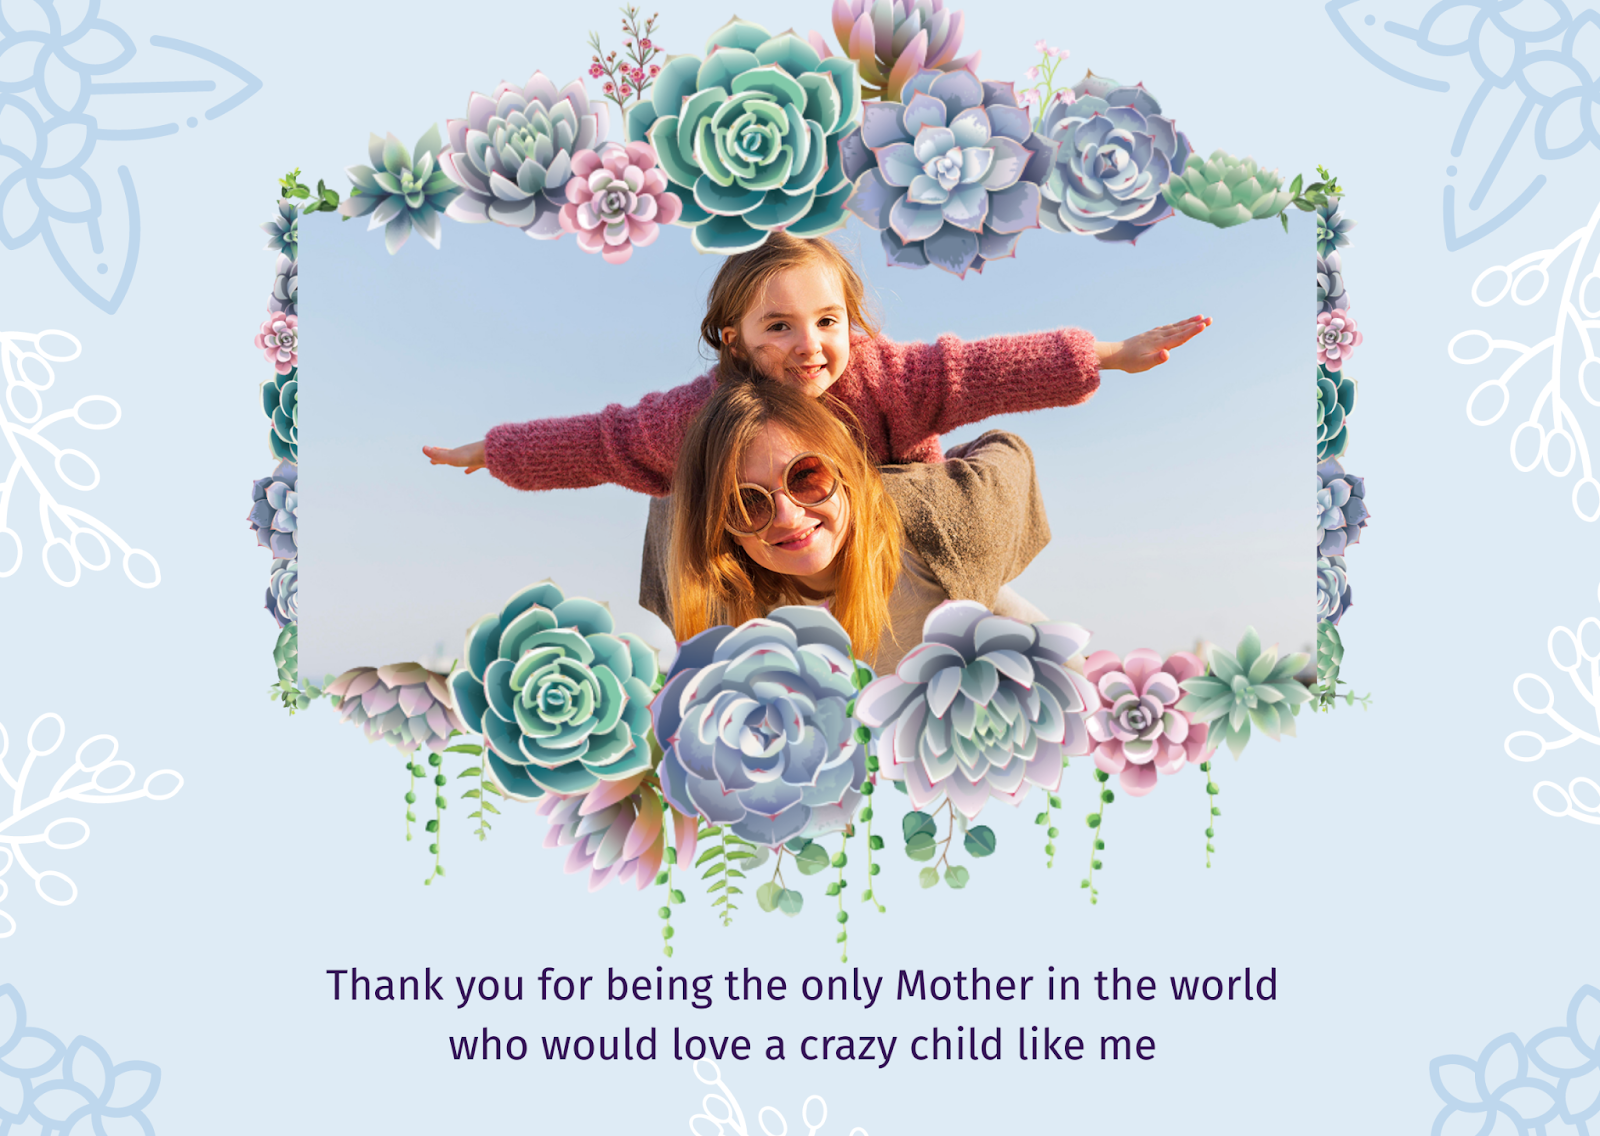 DocHipo Mother's Day card template